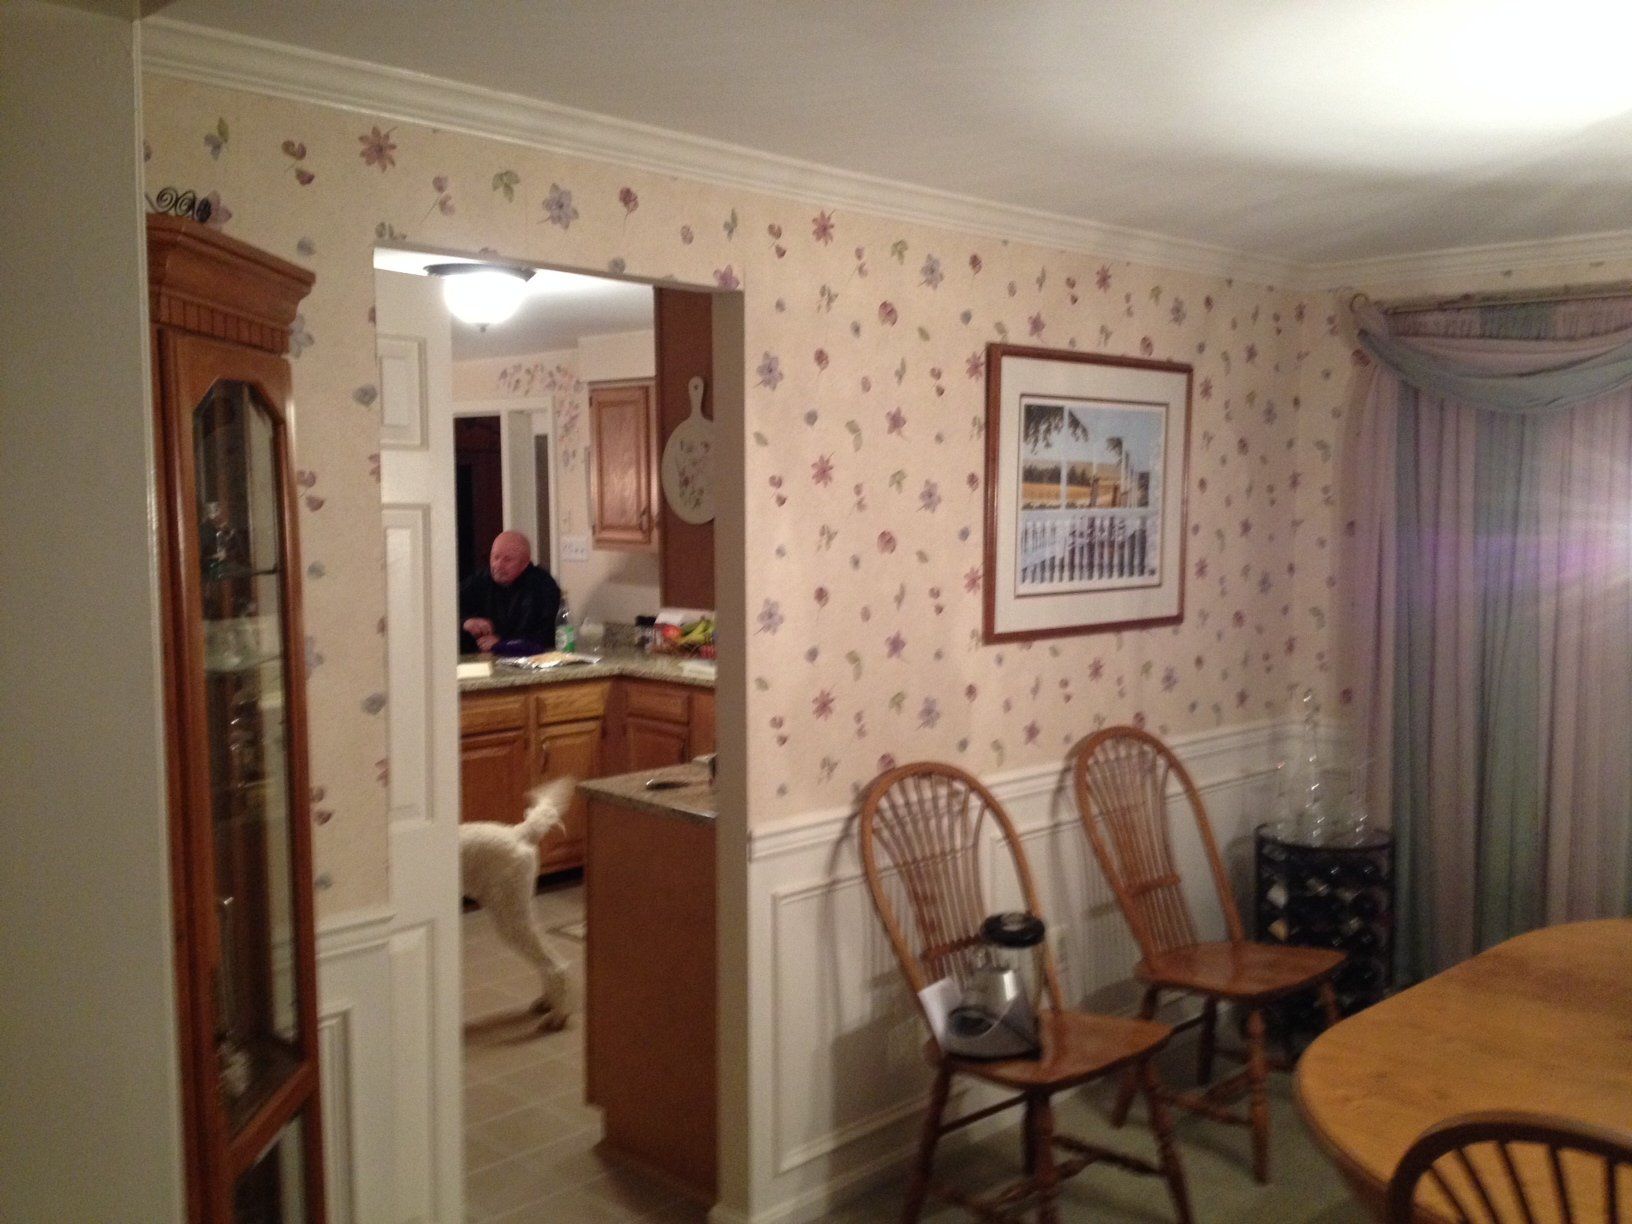 Dining and Kitchen - Home Improvement Services in Glen Arm, MD